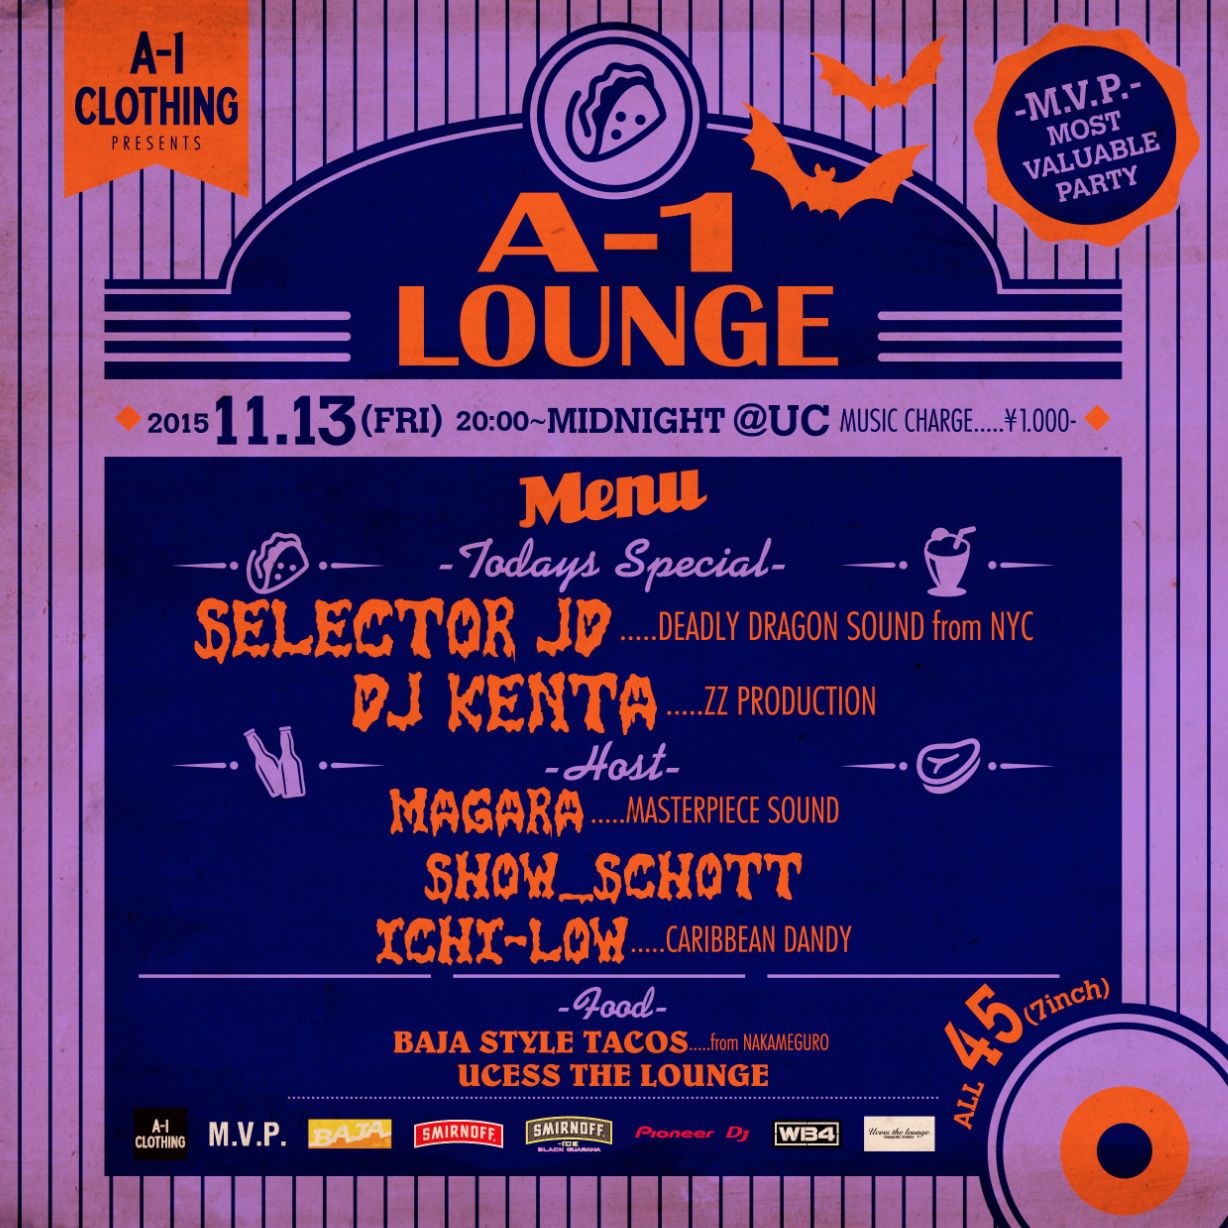 A-1 CLOTHING PRESENTS A-1 LOUNGE -M.V.P.-( MOST VALUABLE PARTY)